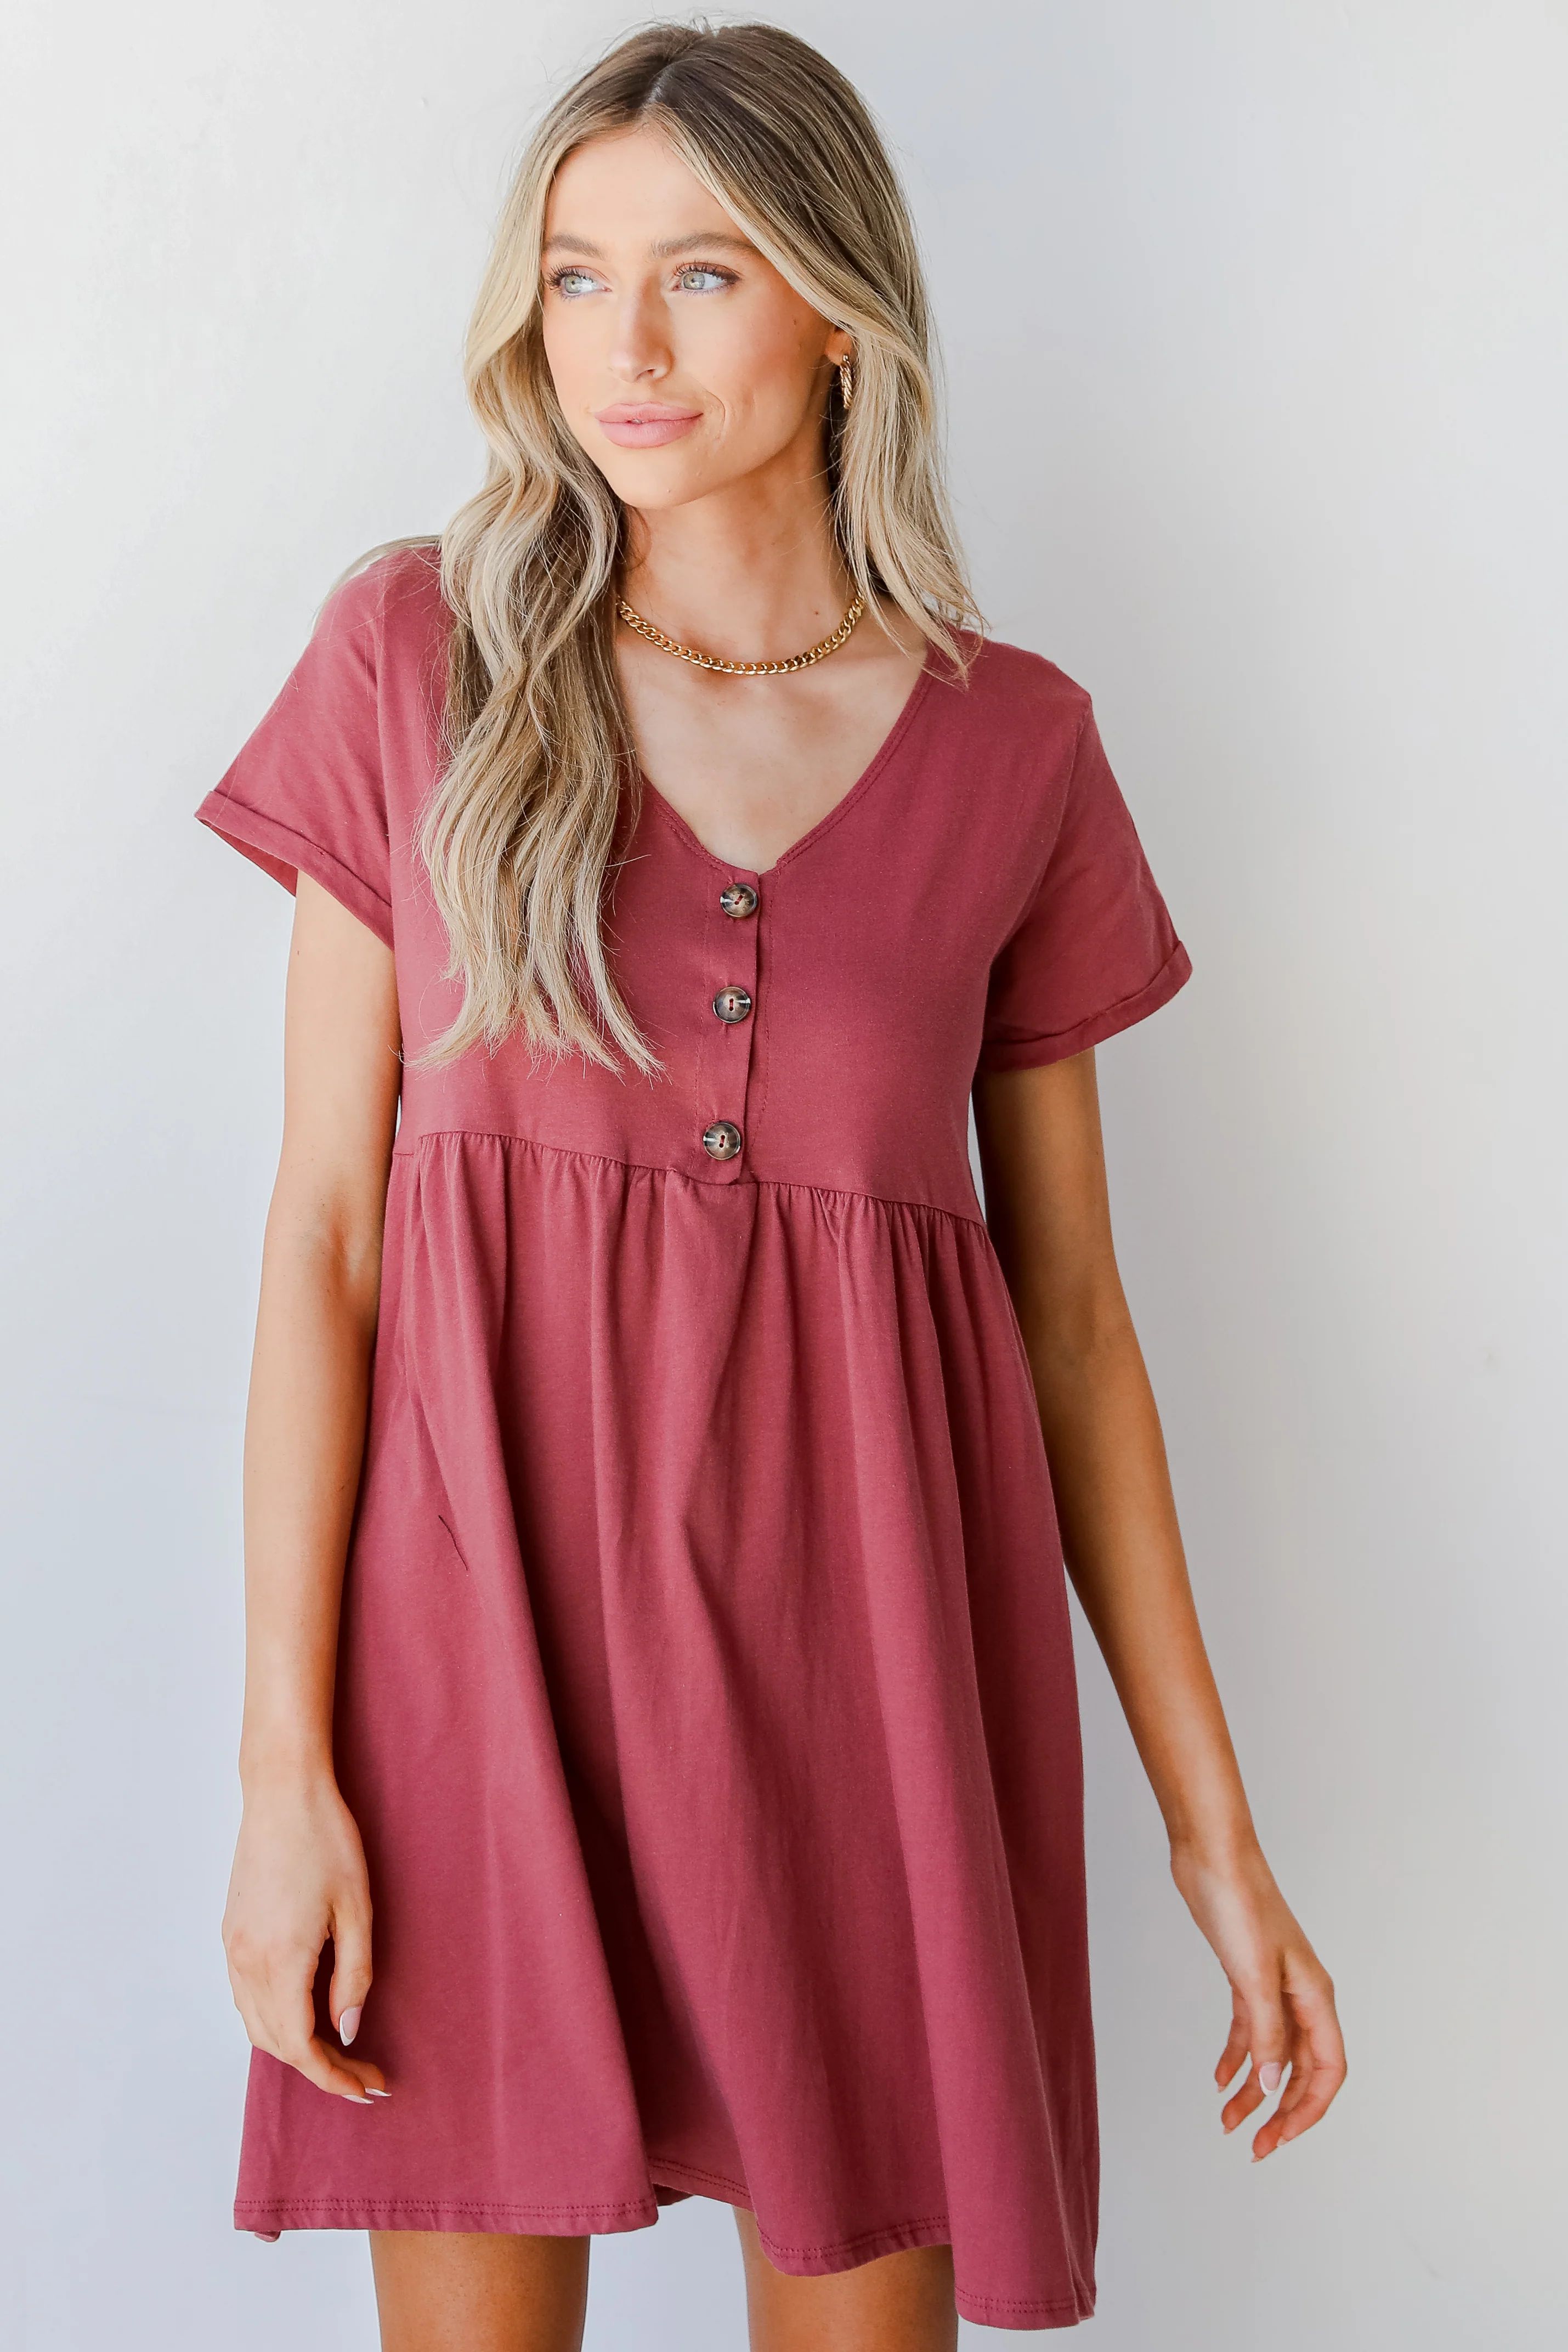 Afternoon Dates Button Front Babydoll Dress | Dress Up